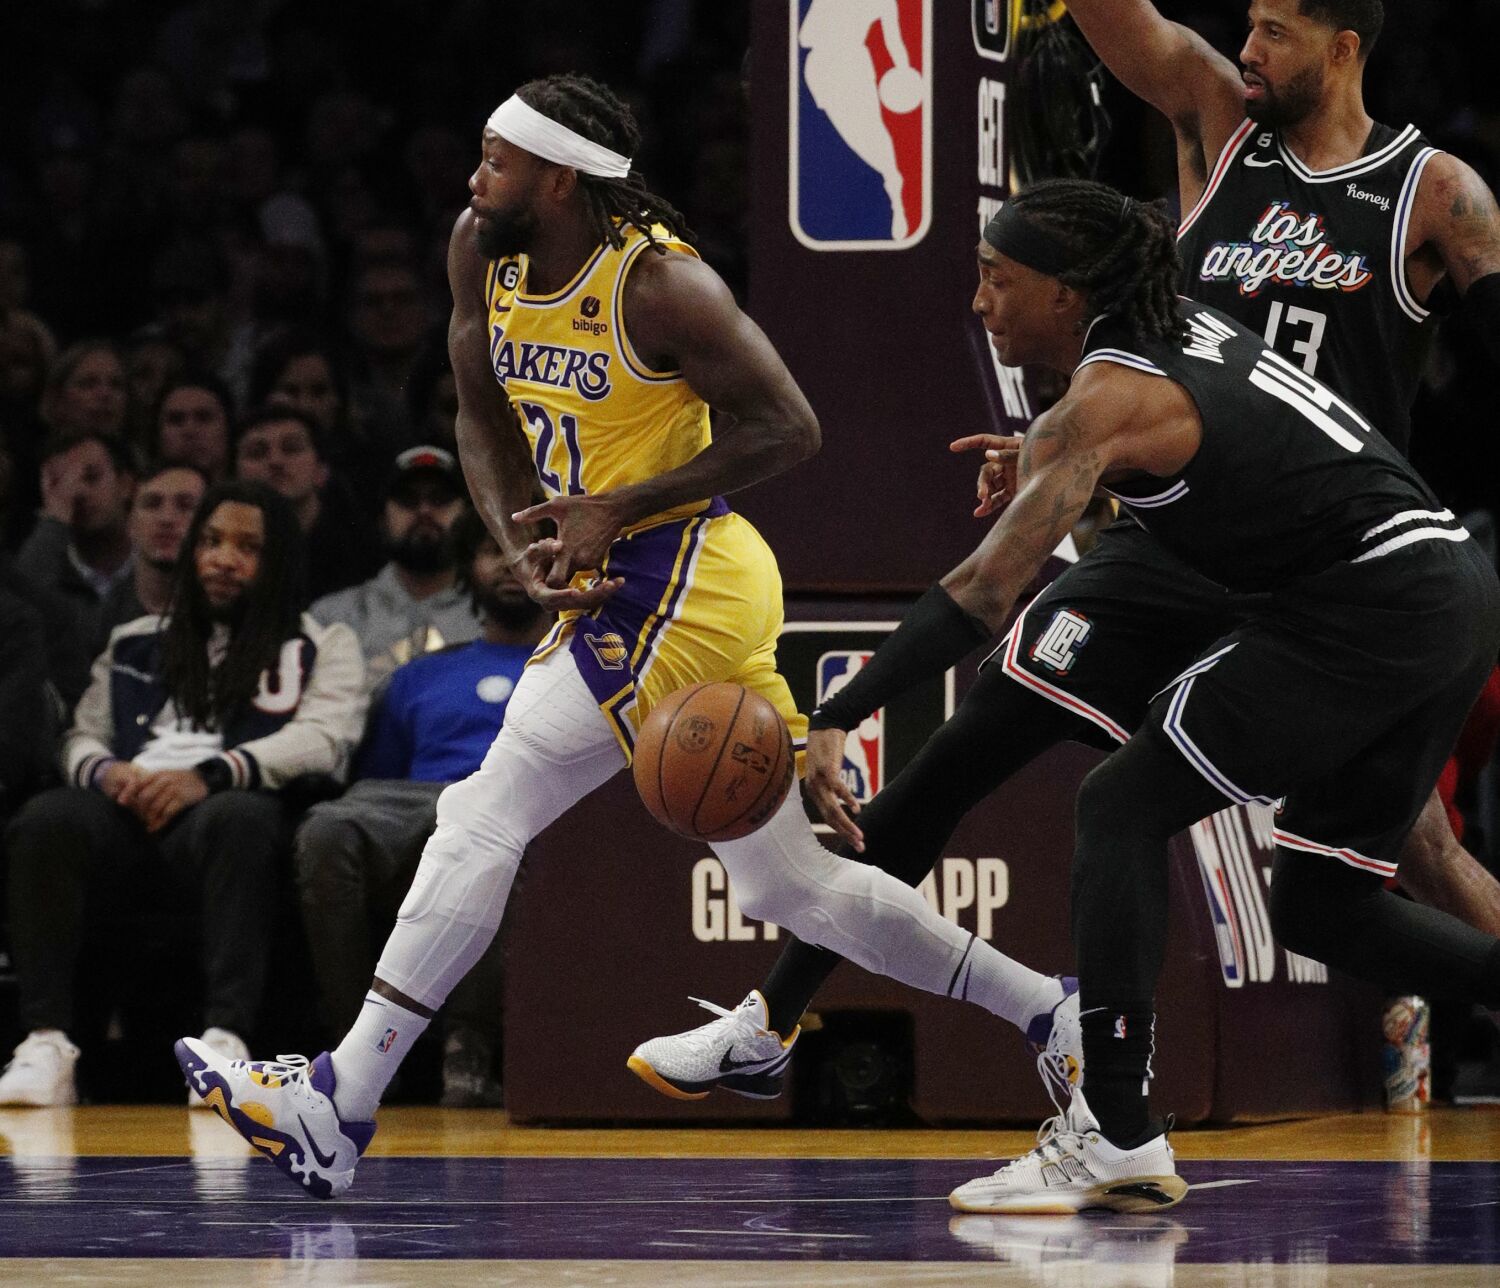 'That's growth for us.' Clippers turn struggles into strengths in promising win over Lakers